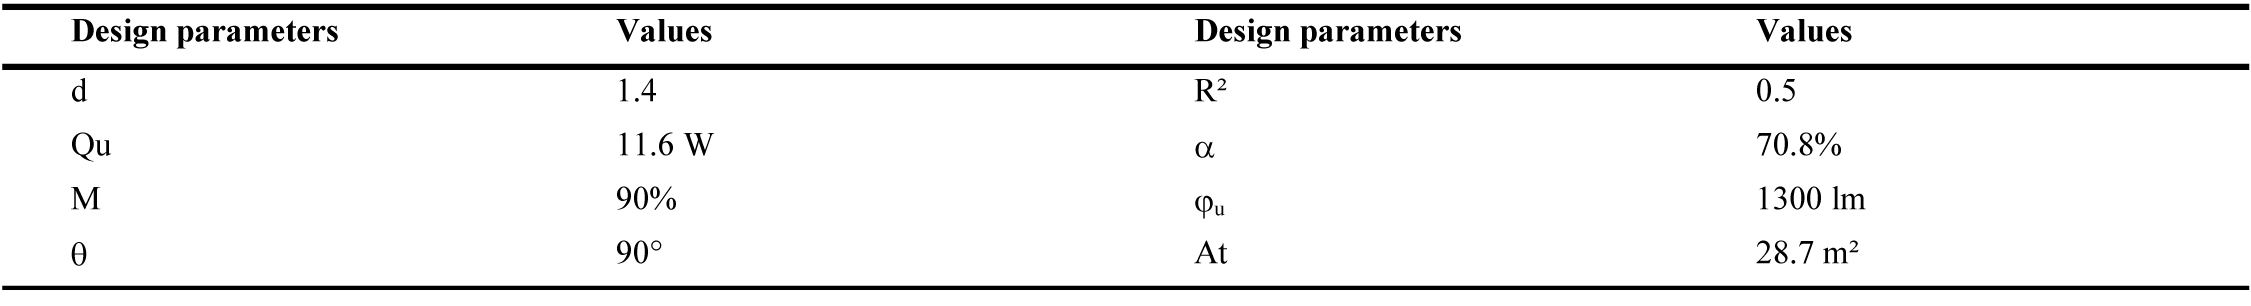 Characterization of the design parameters used in the optimization.